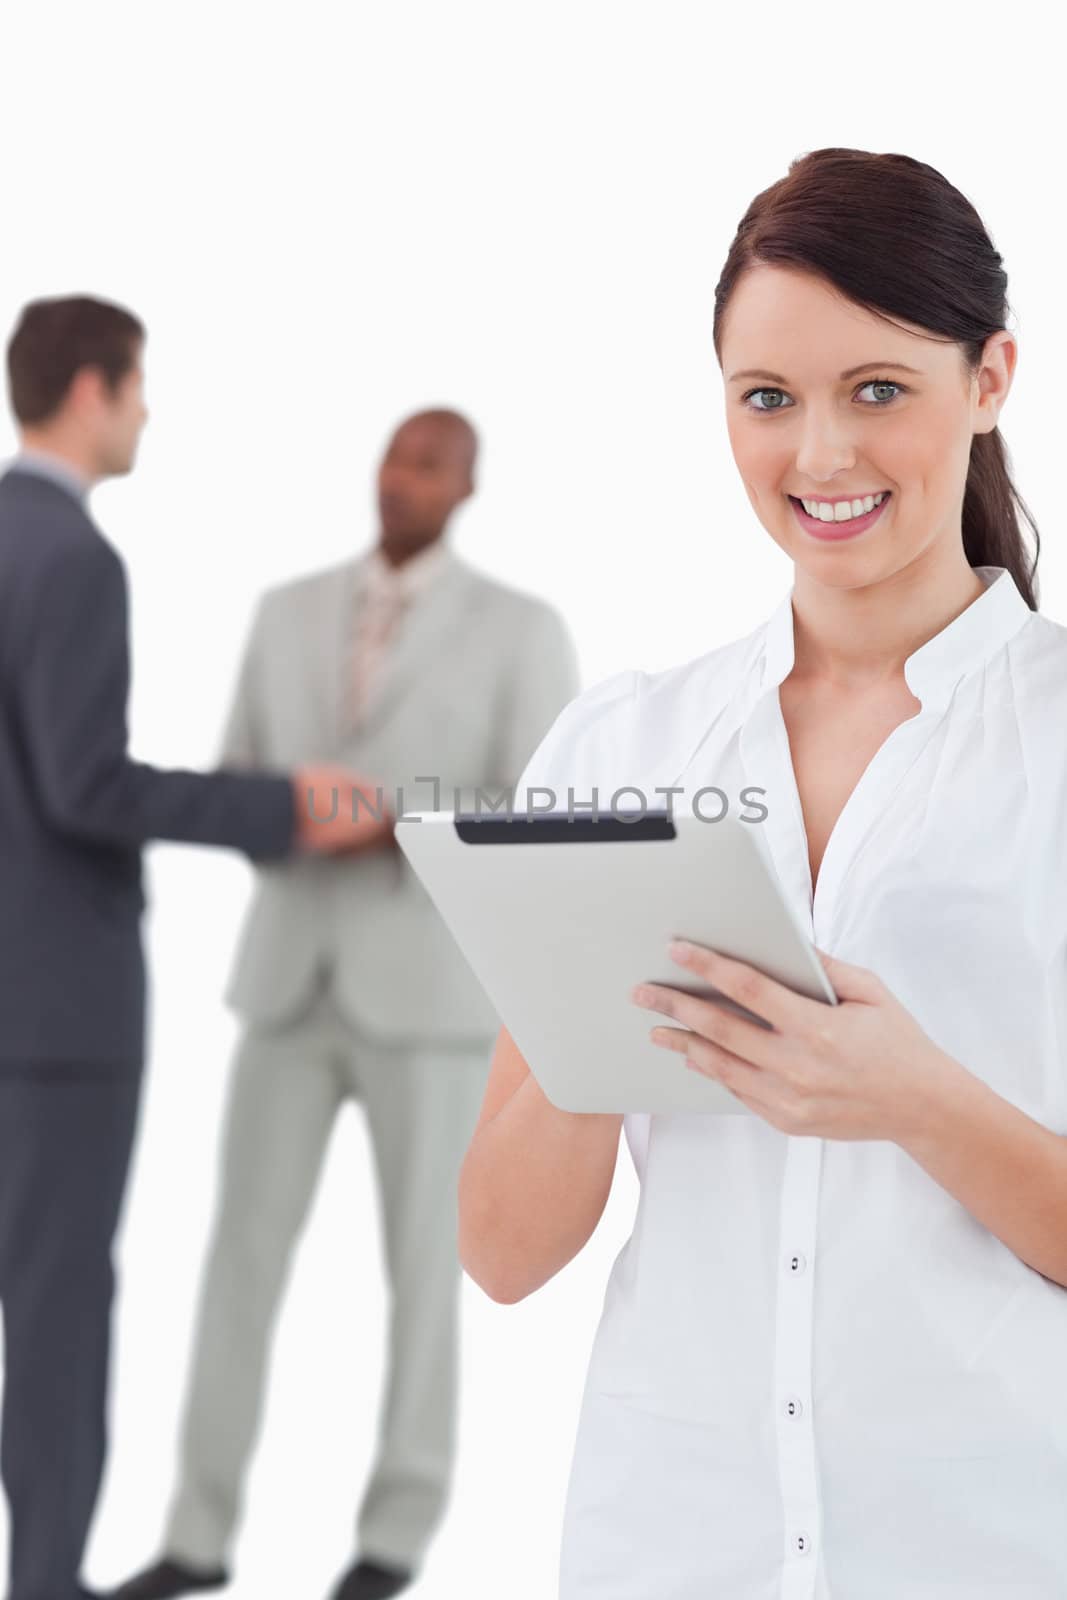 Businesswoman with tablet and associates behind her against a white background